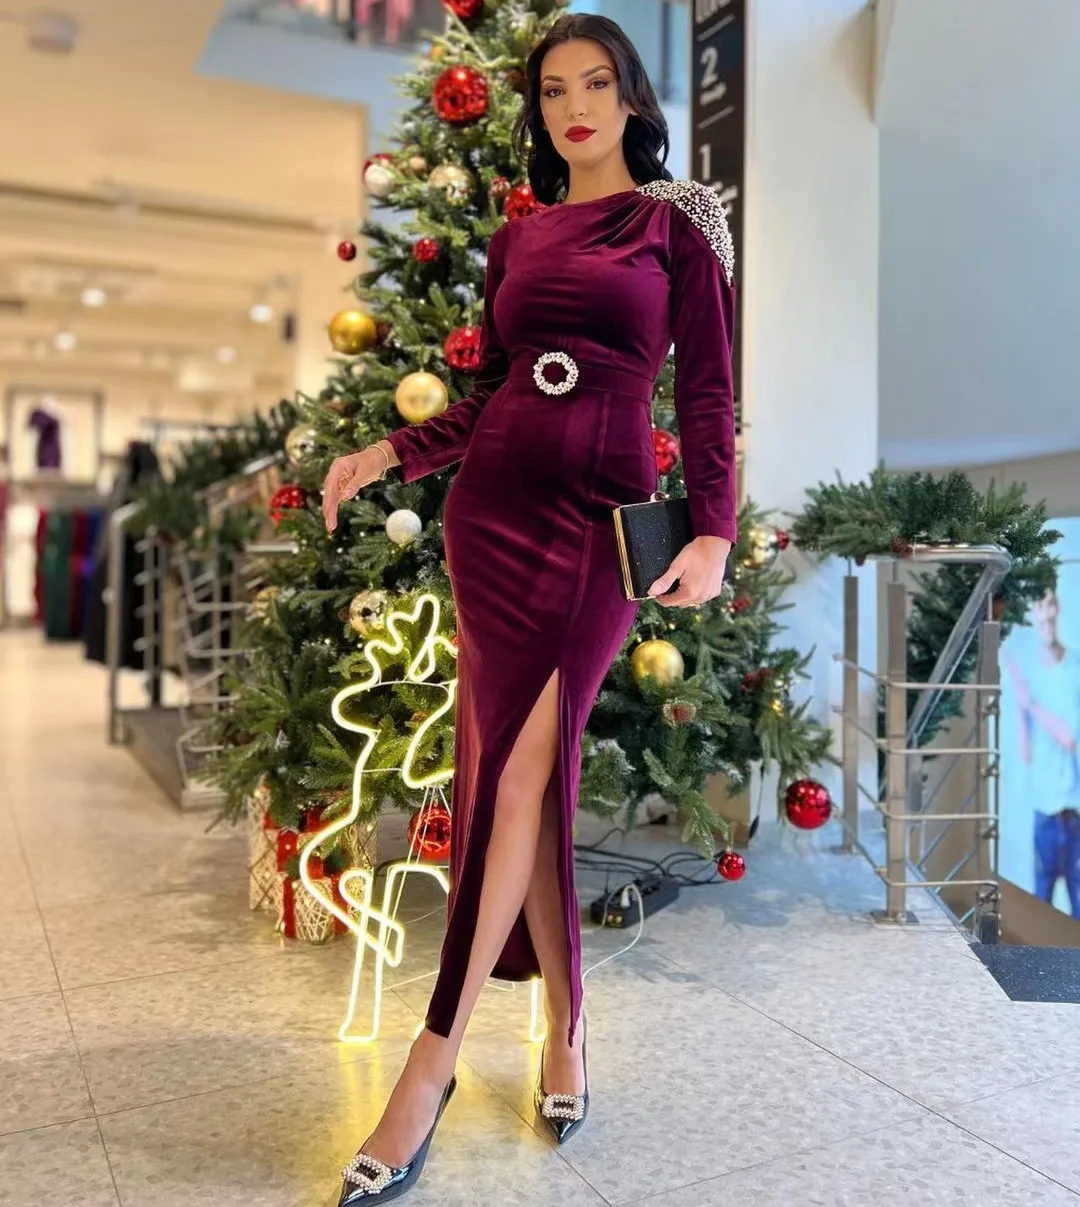 

Crew Neck Prom Dresses with Sash Beaded Ruched Long Sleeves Cocktail Party Dress Side Slit Sexy Velour Evening Night Club Gowns